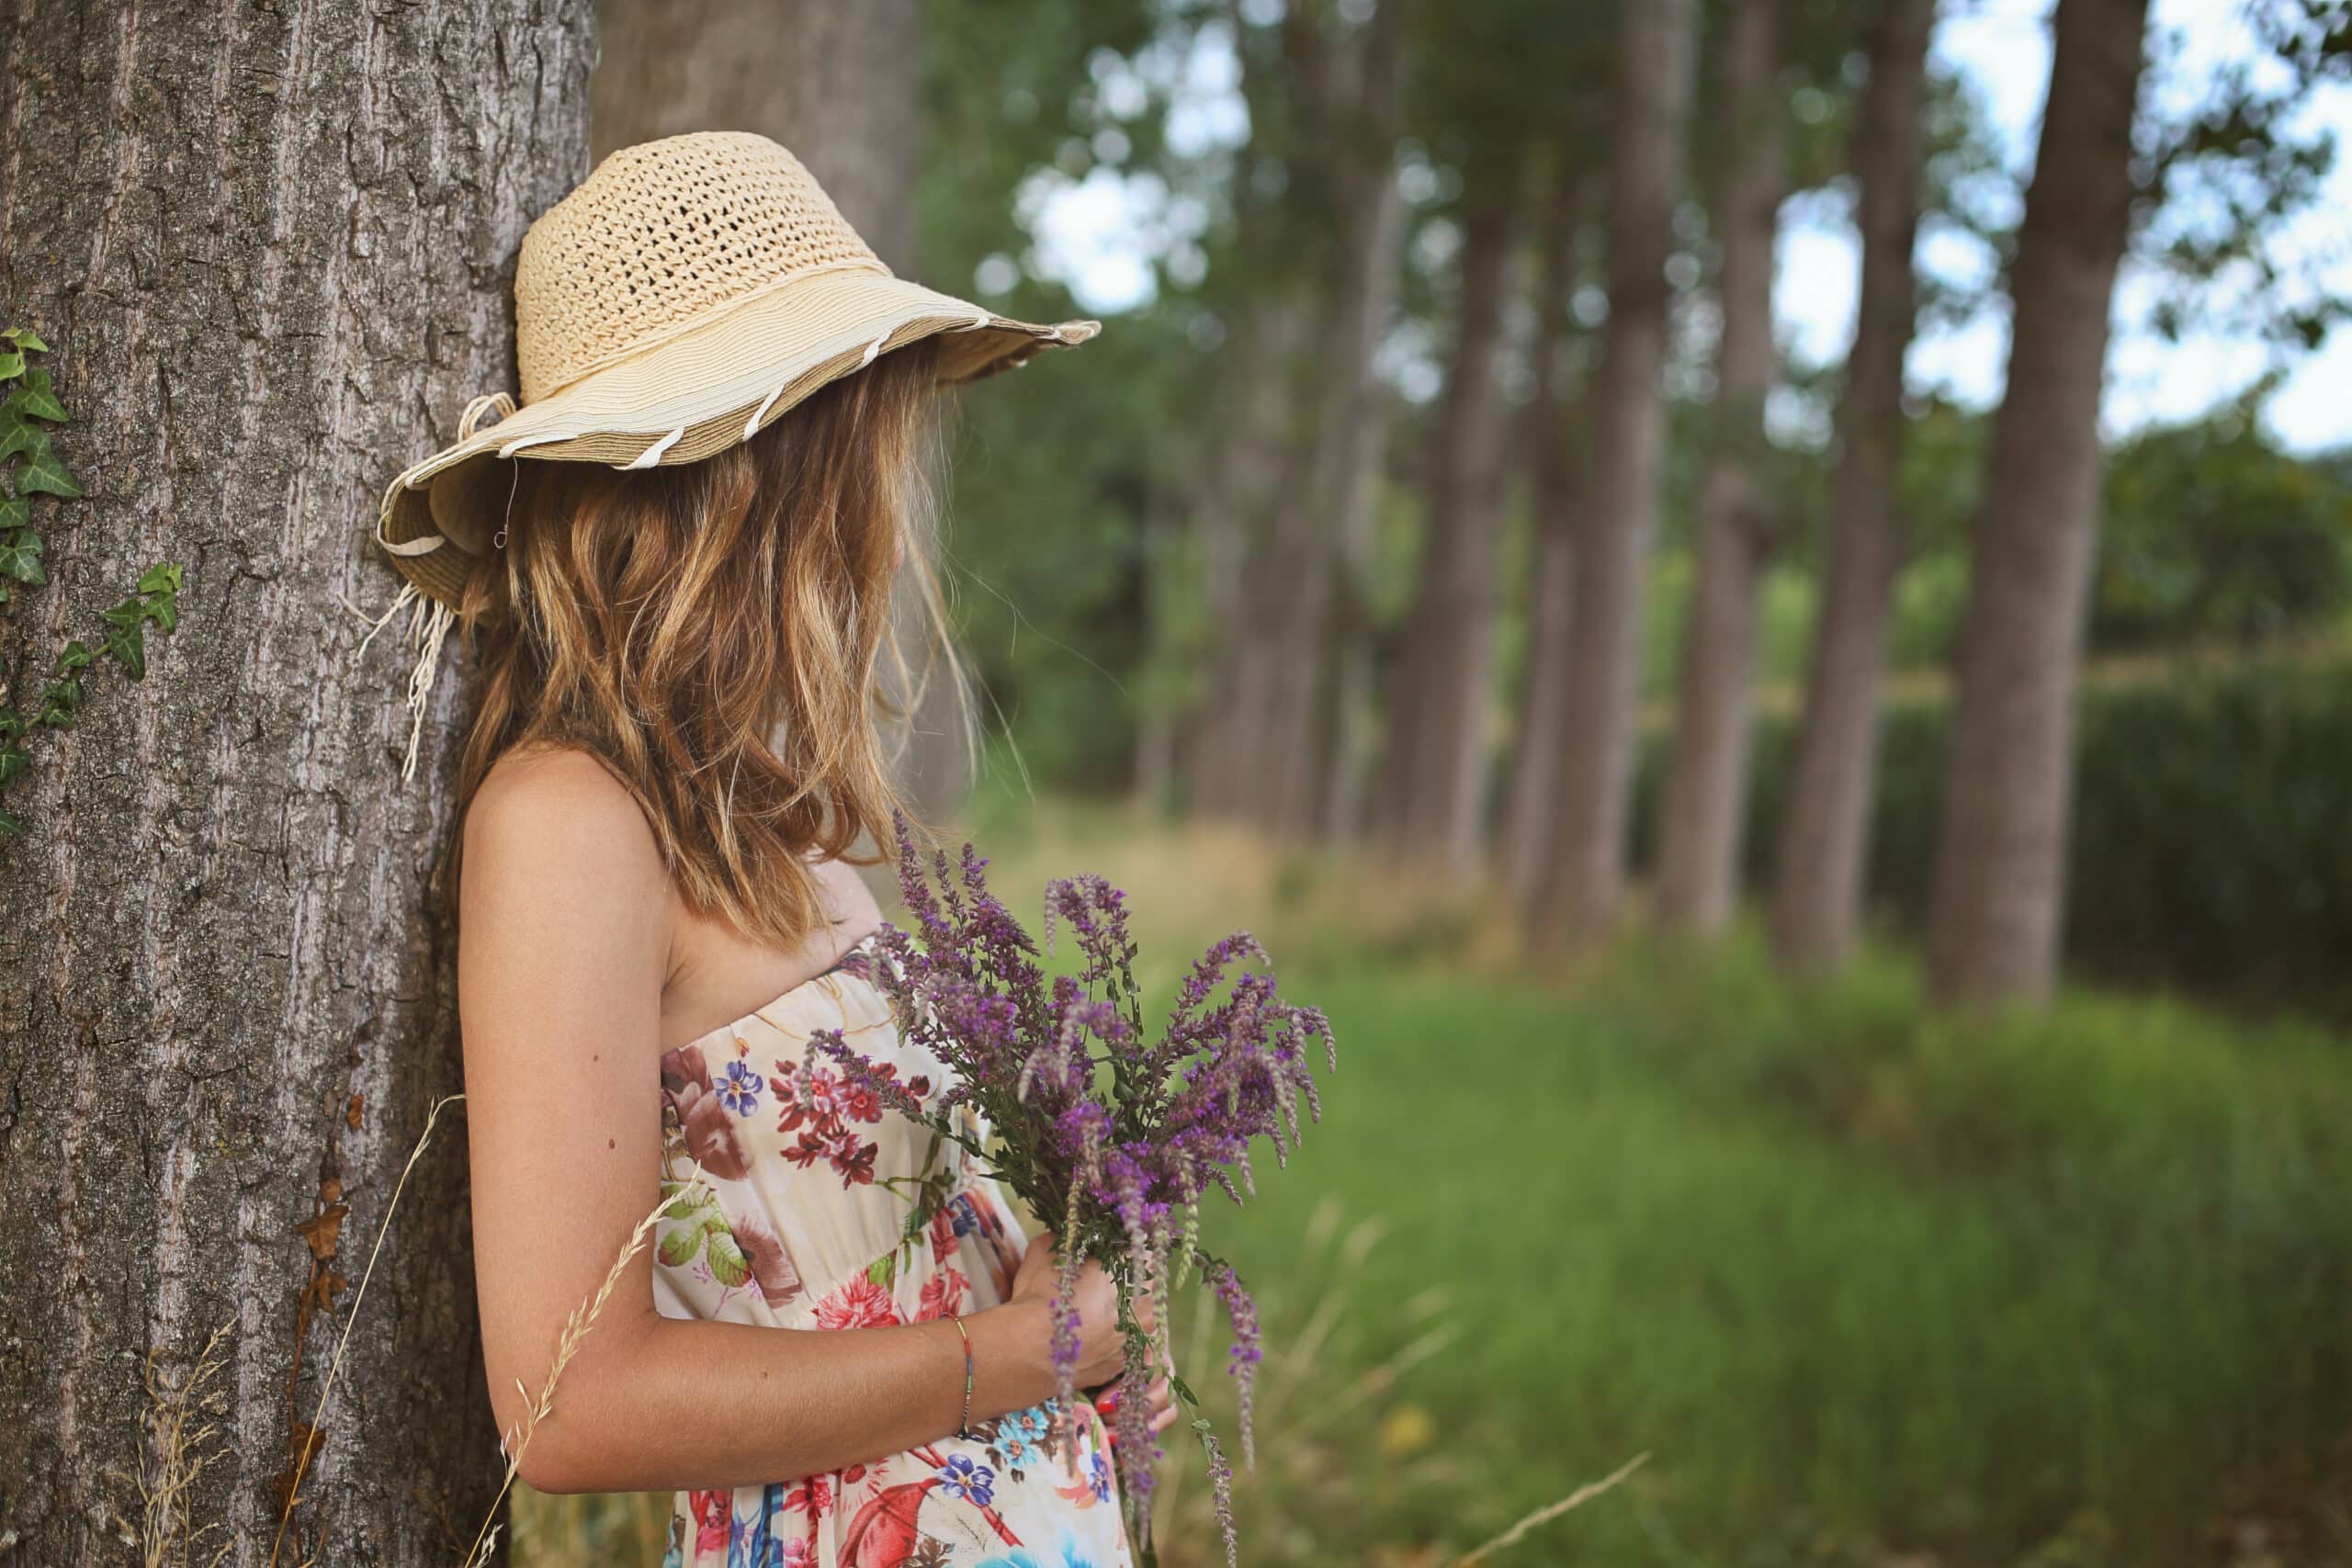 Young woman with wild flowers leaning against a tree in nature.